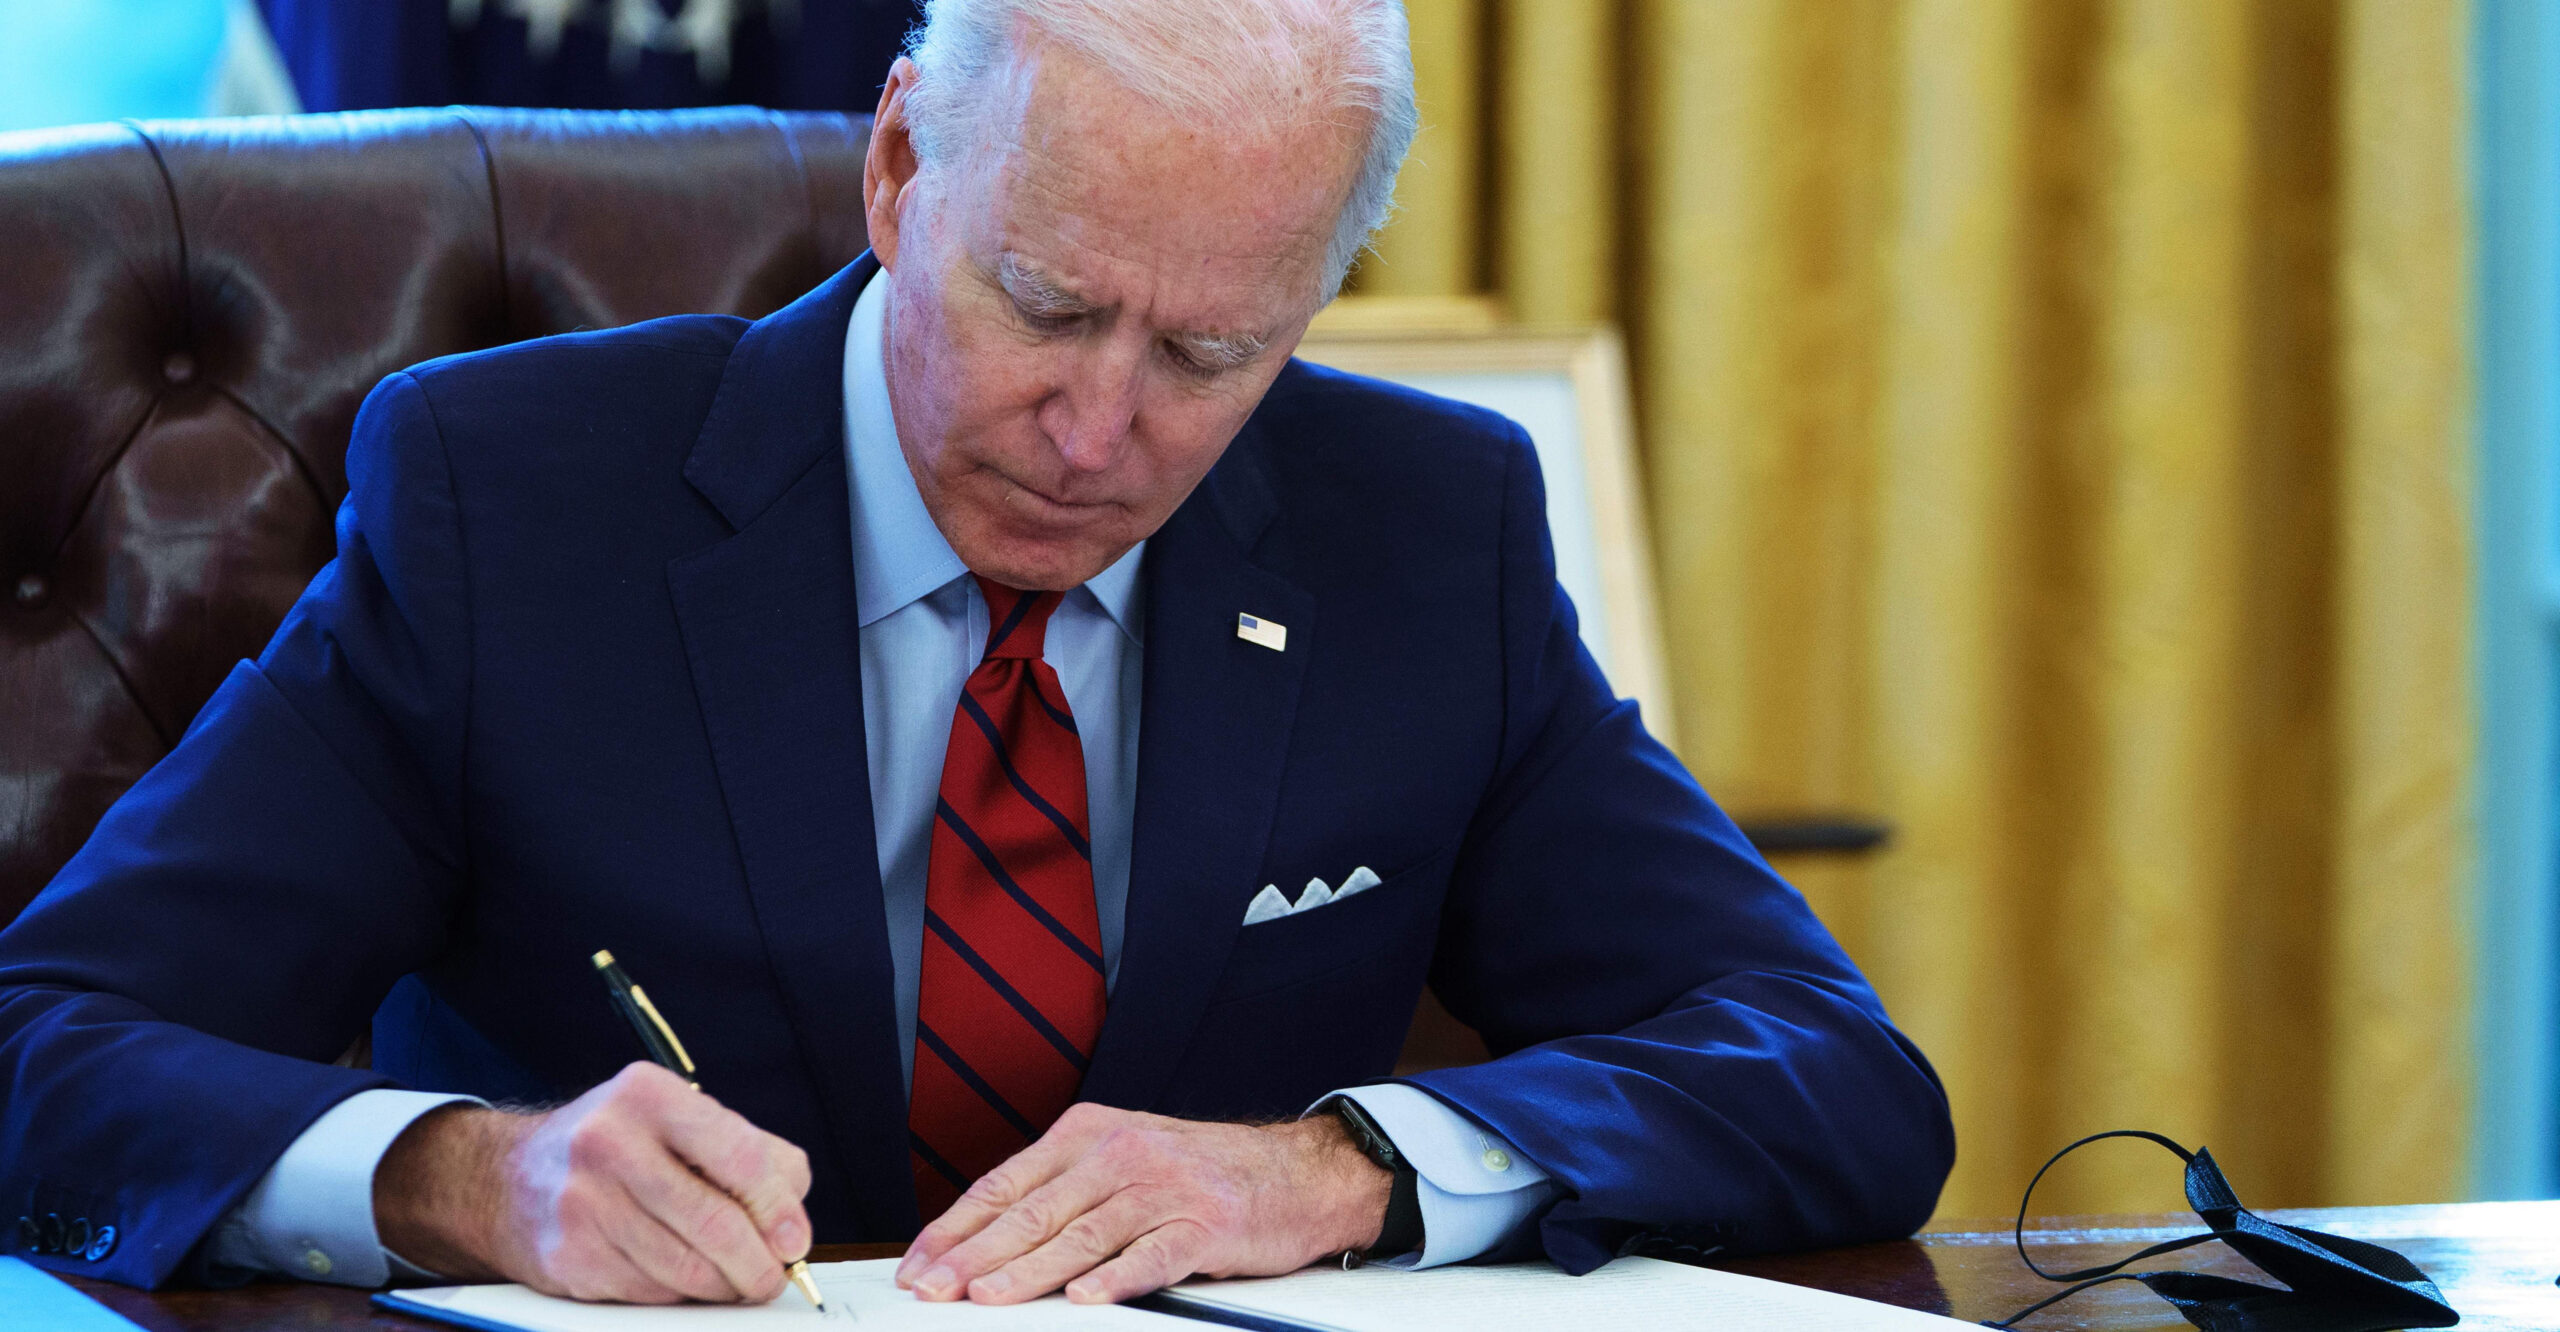 Biden's Taxpayer Funding for Abortion Far Outspends Obama